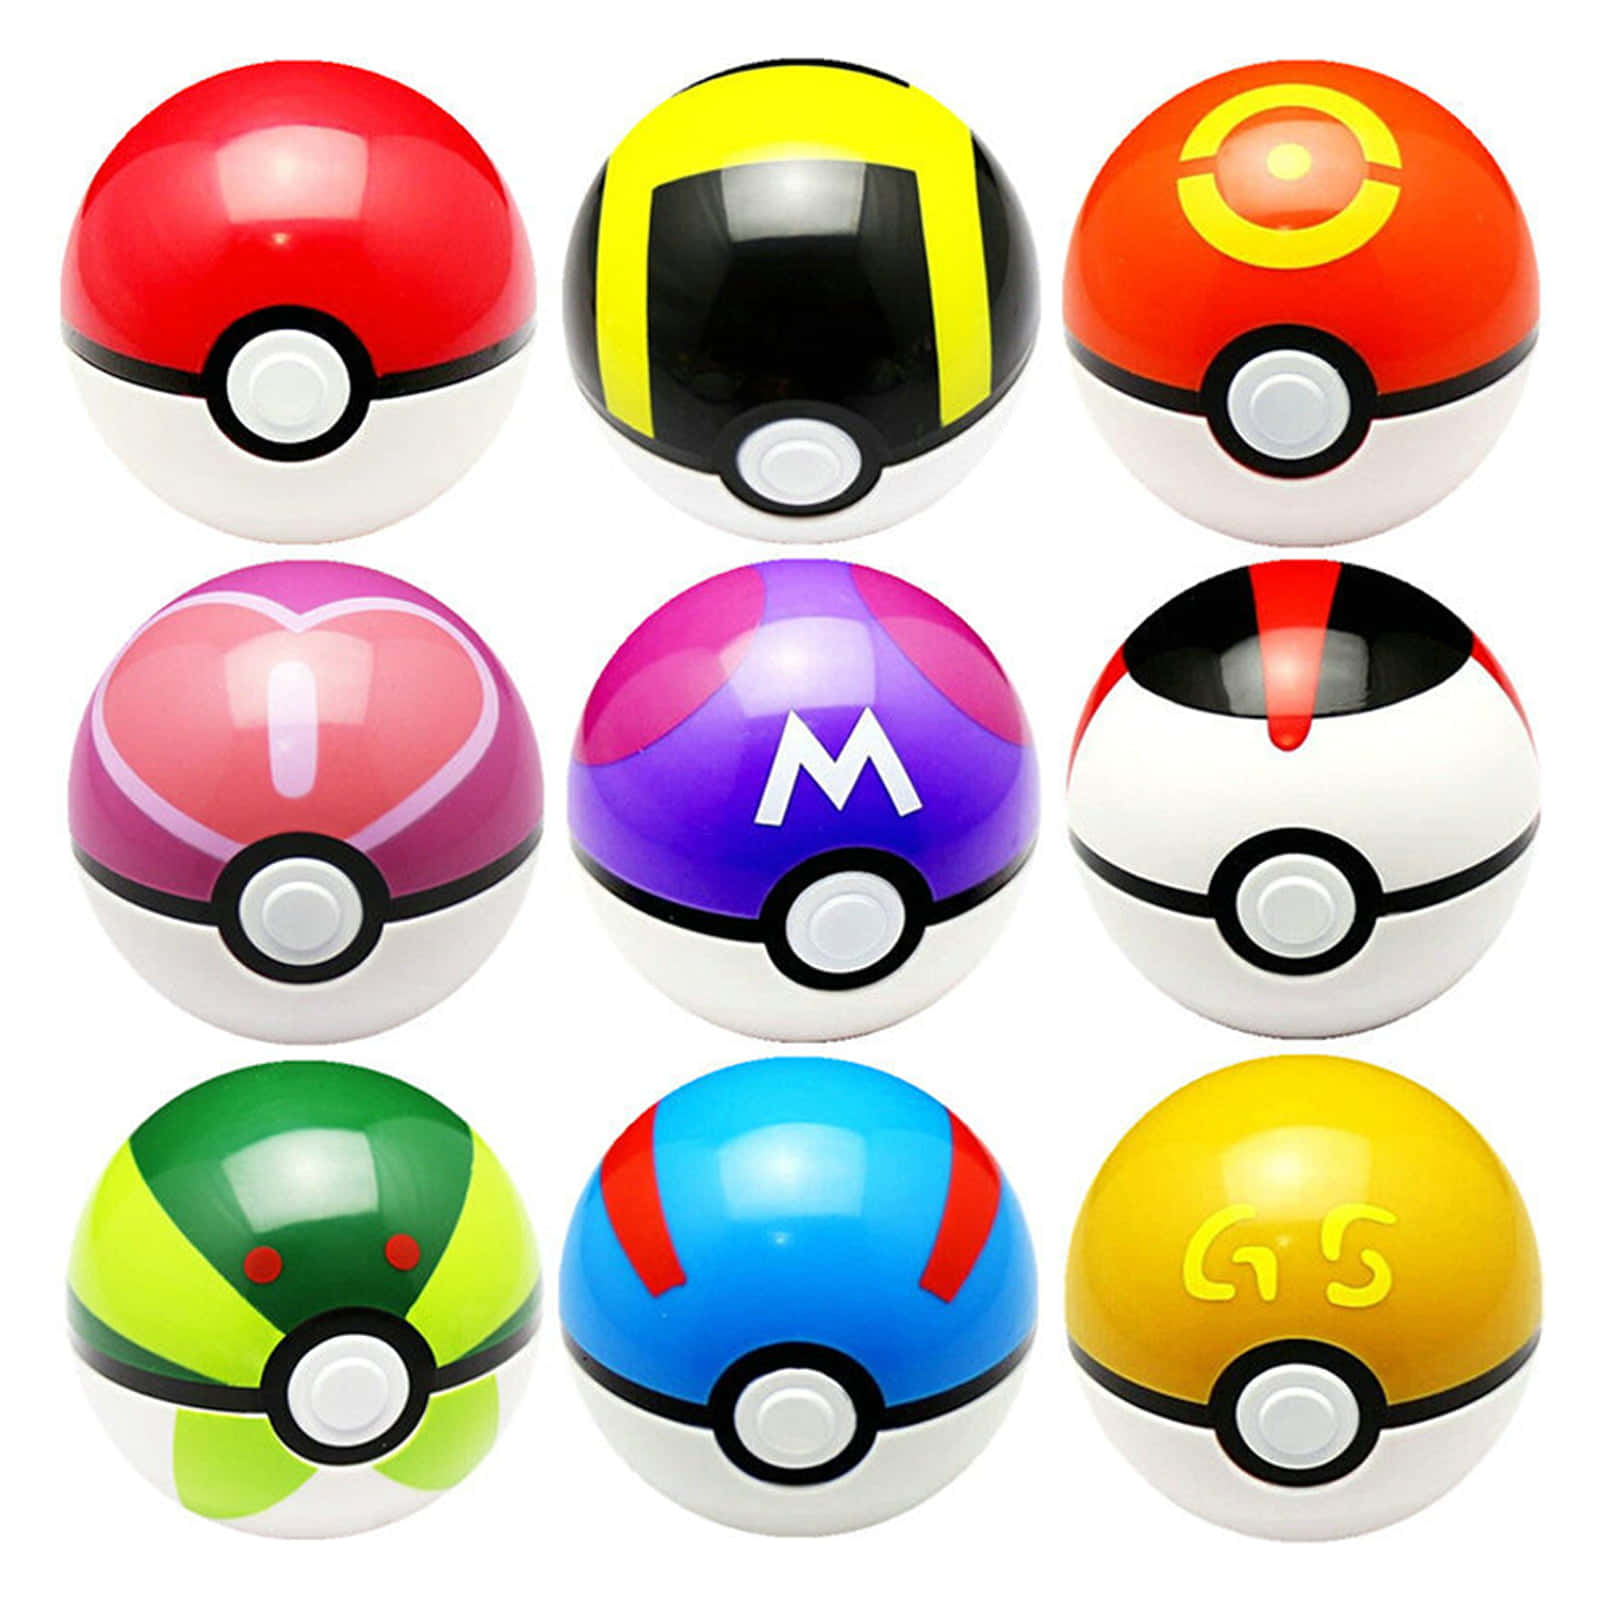 "Be a part of the Pokémon world with this classic red and white Pokéball"